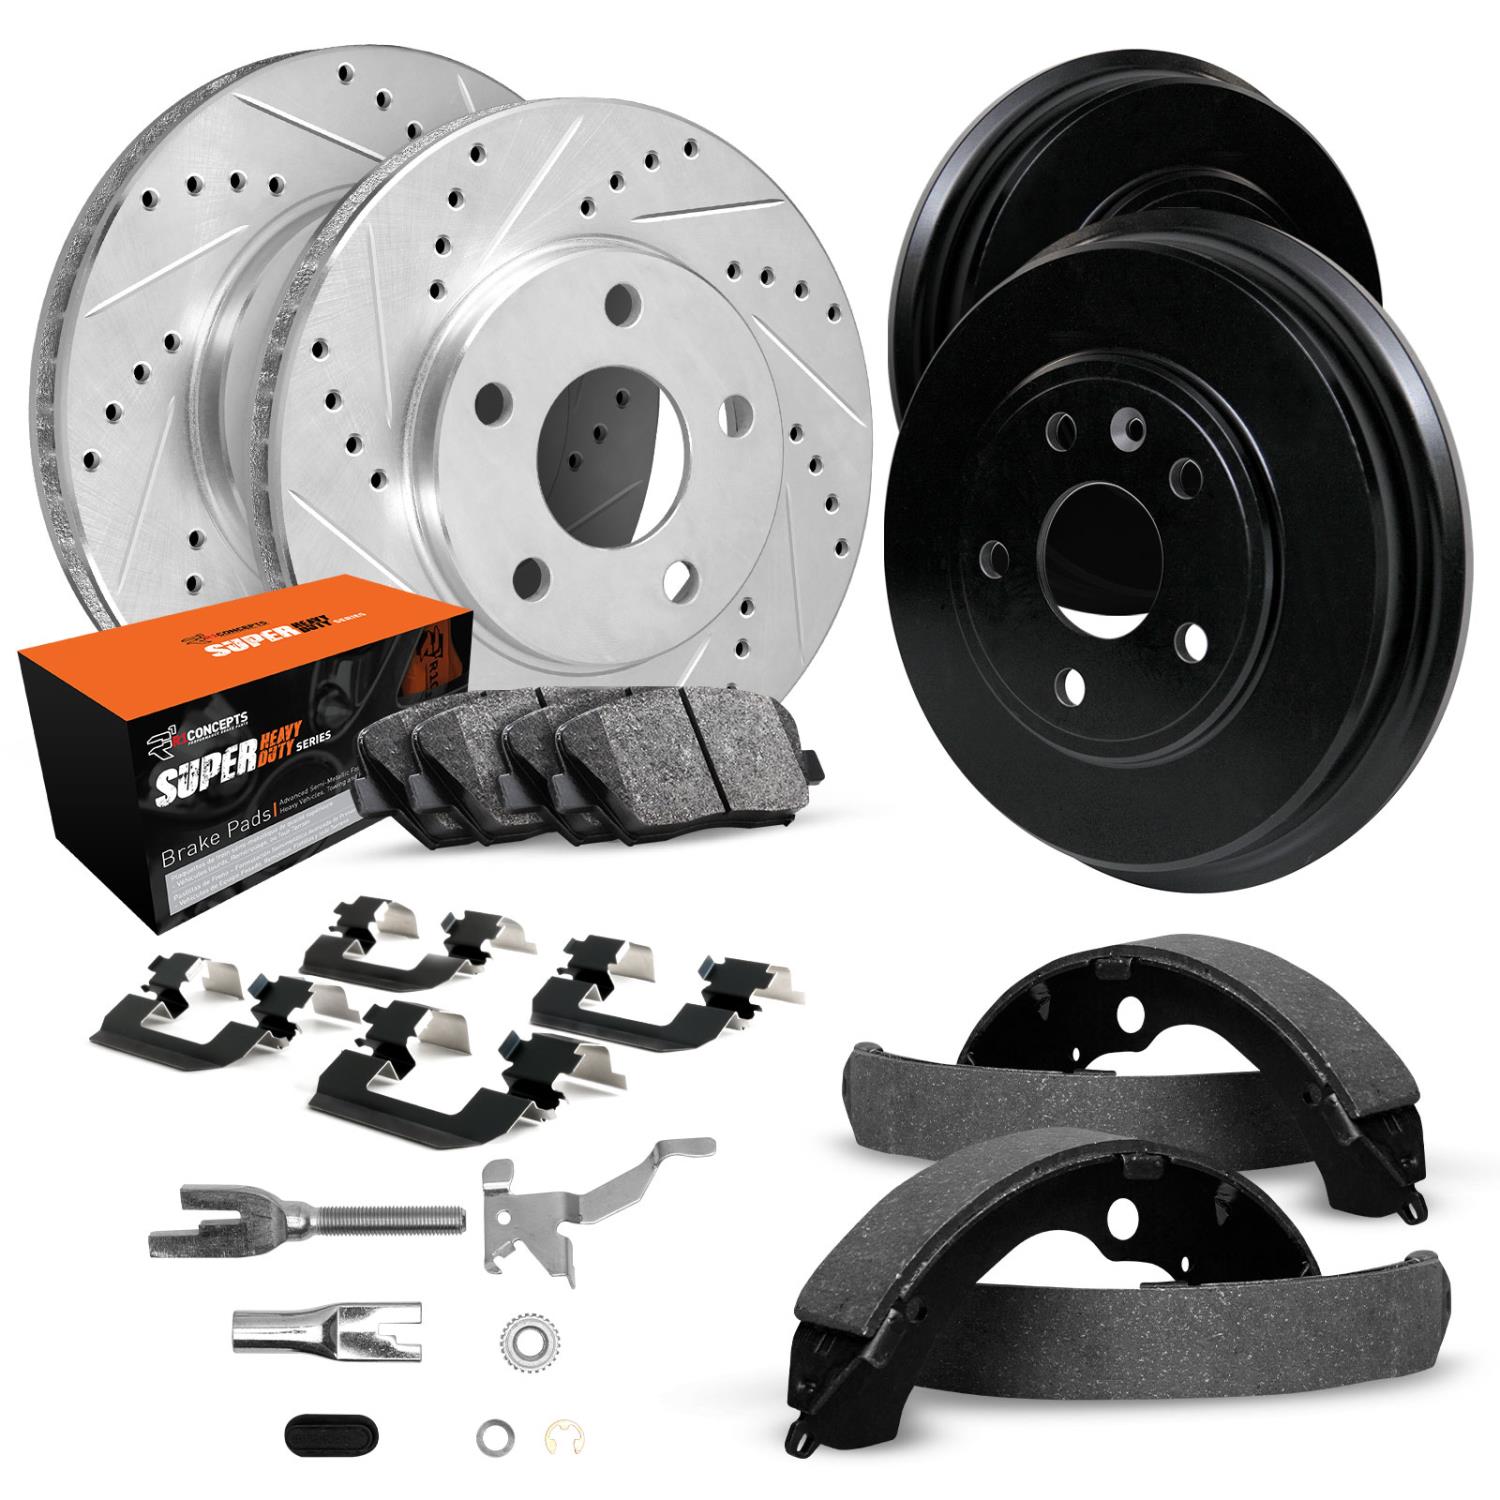 E-Line Drilled/Slotted Silver Rotor & Drum Set w/Super-Duty Pads, Shoes/Hardware/Adjusters, 1994-1995 Ford/Lincoln/Mercury/Mazda